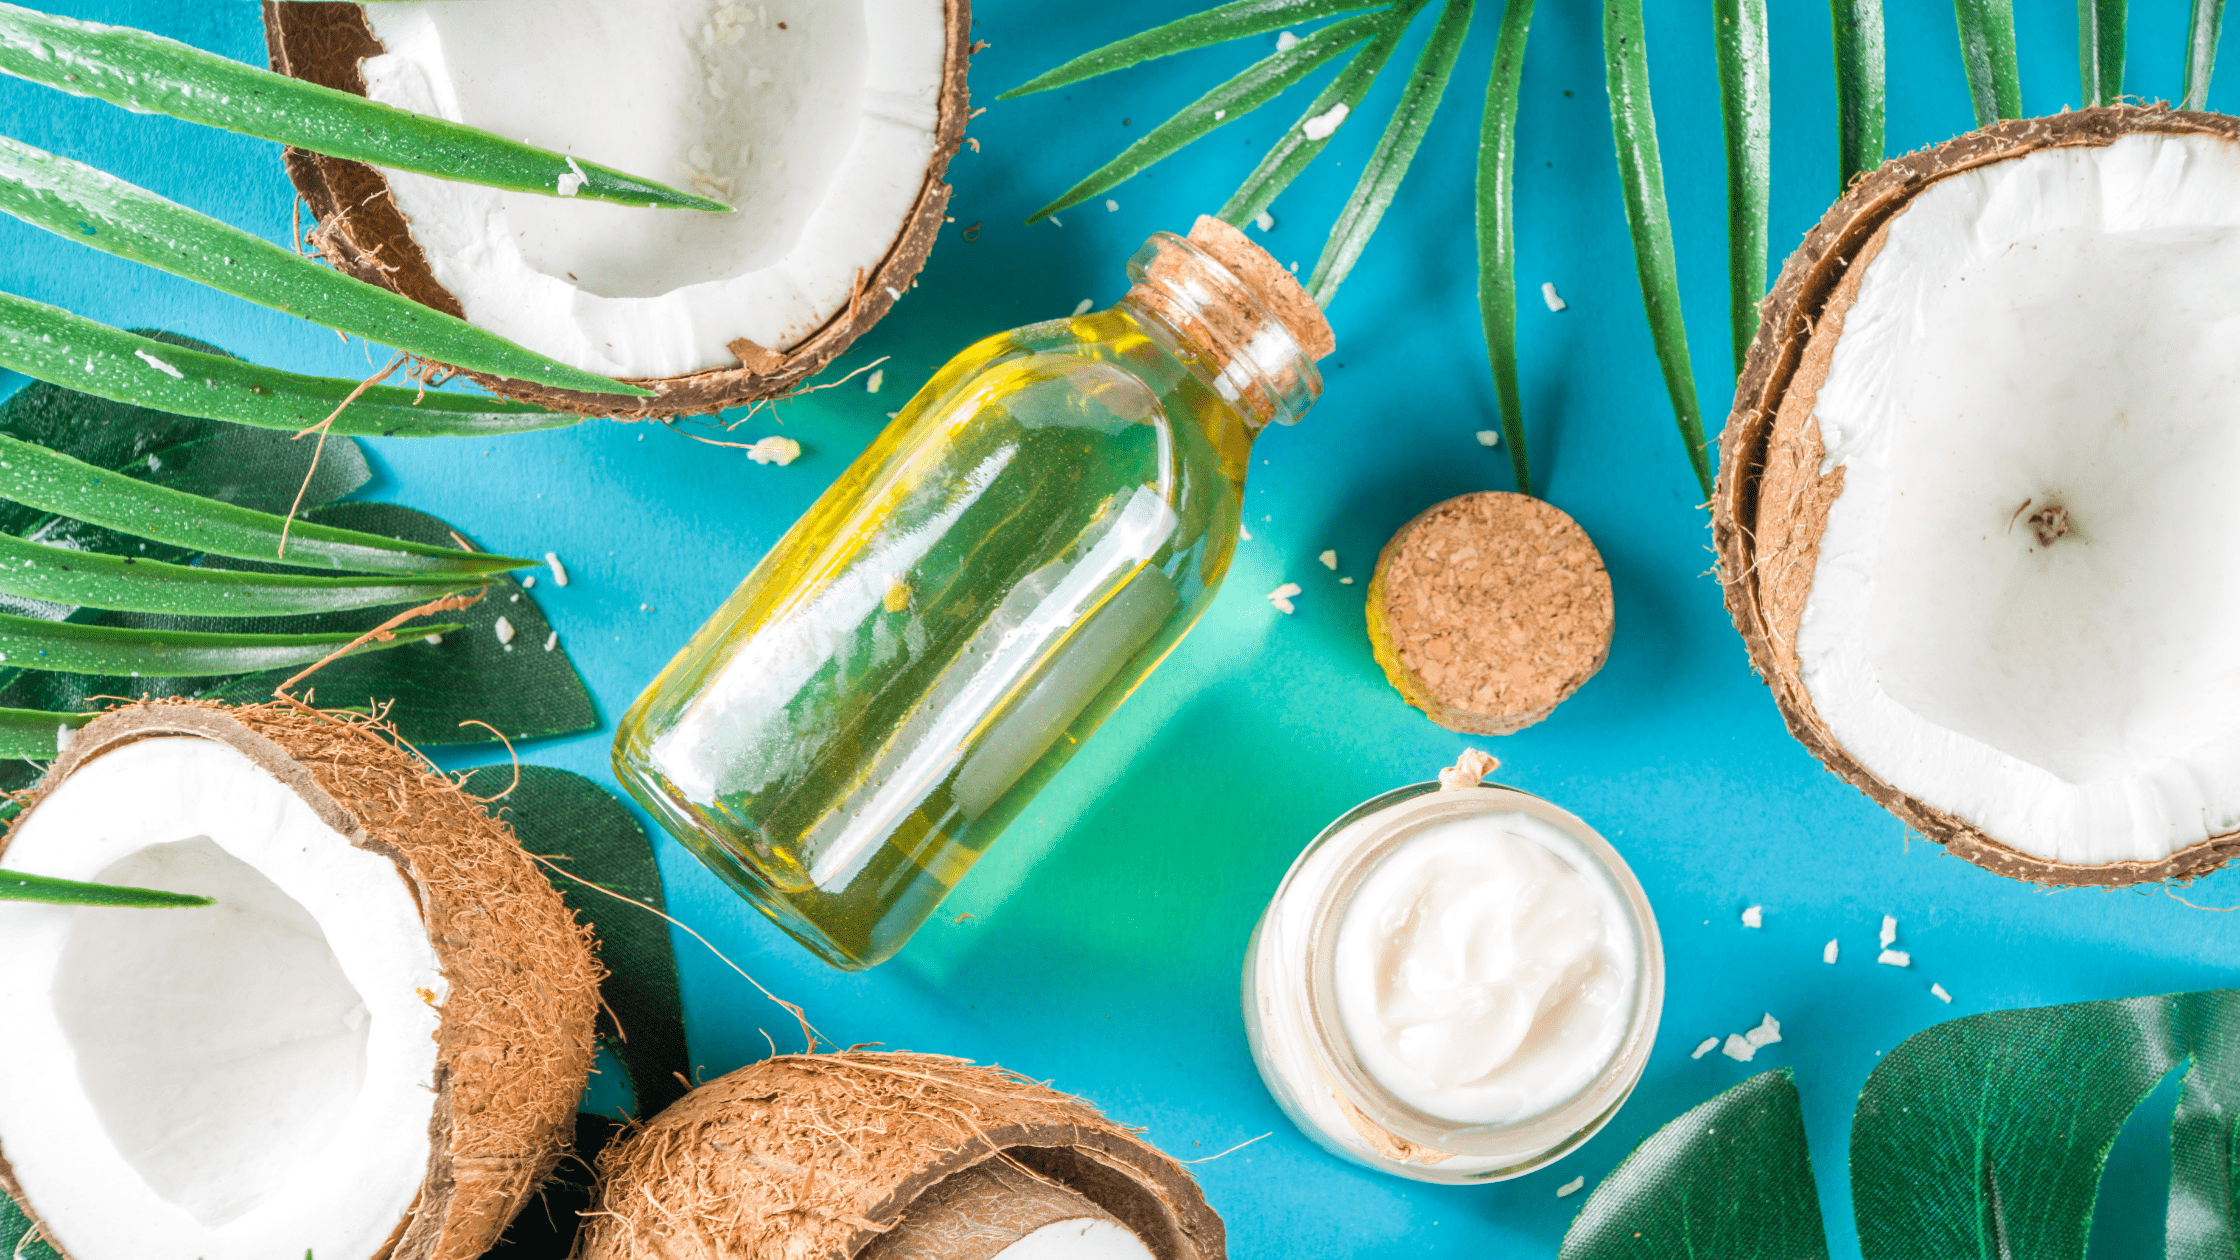 mct oil or coconut oil for cooking